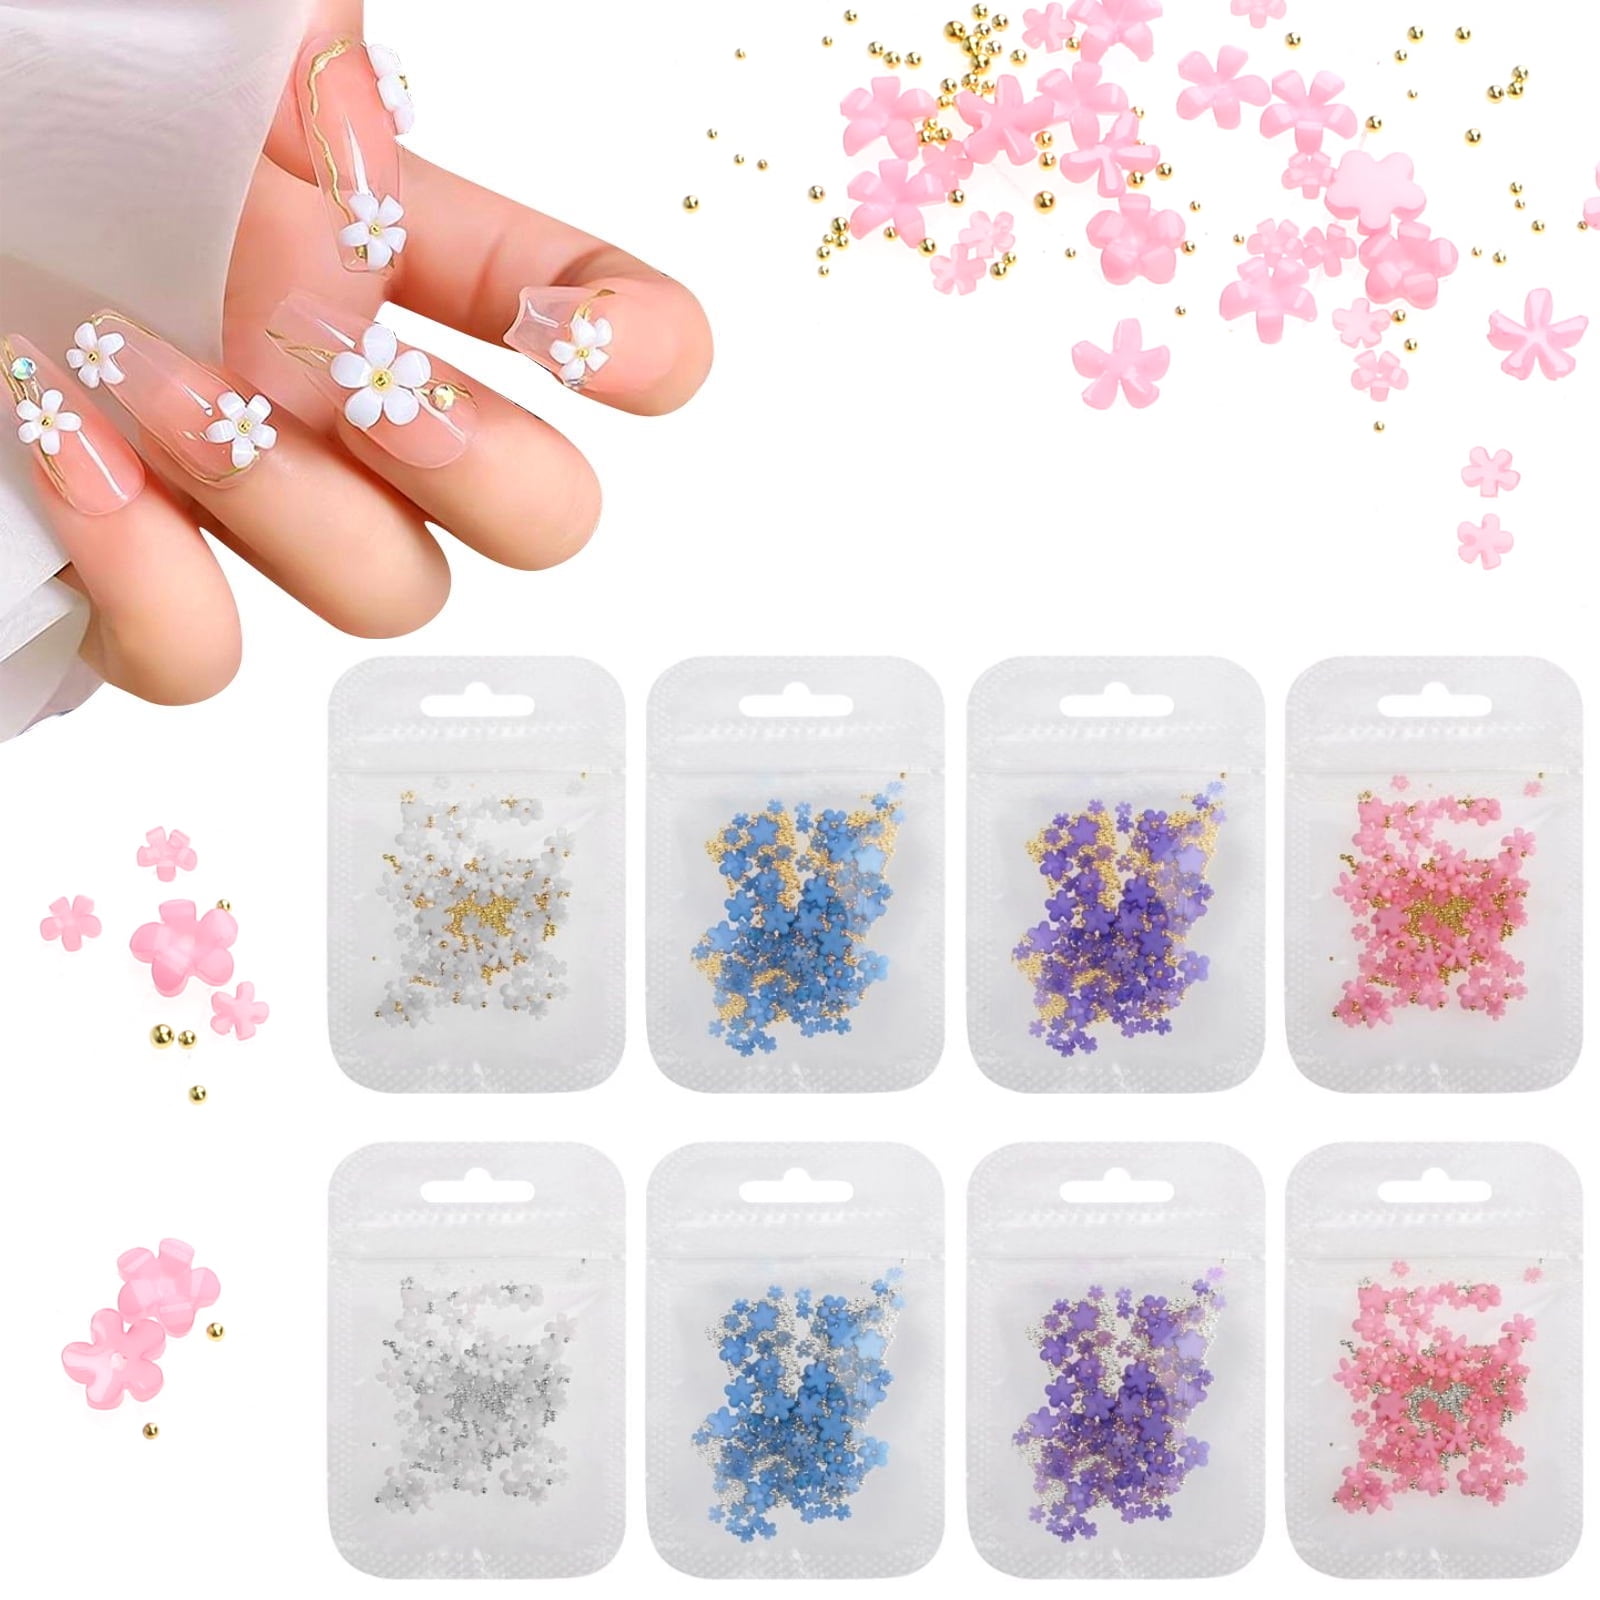 50pcs 3D Acrylic Nails Charms for Mix Styles Rhinestones for Nails